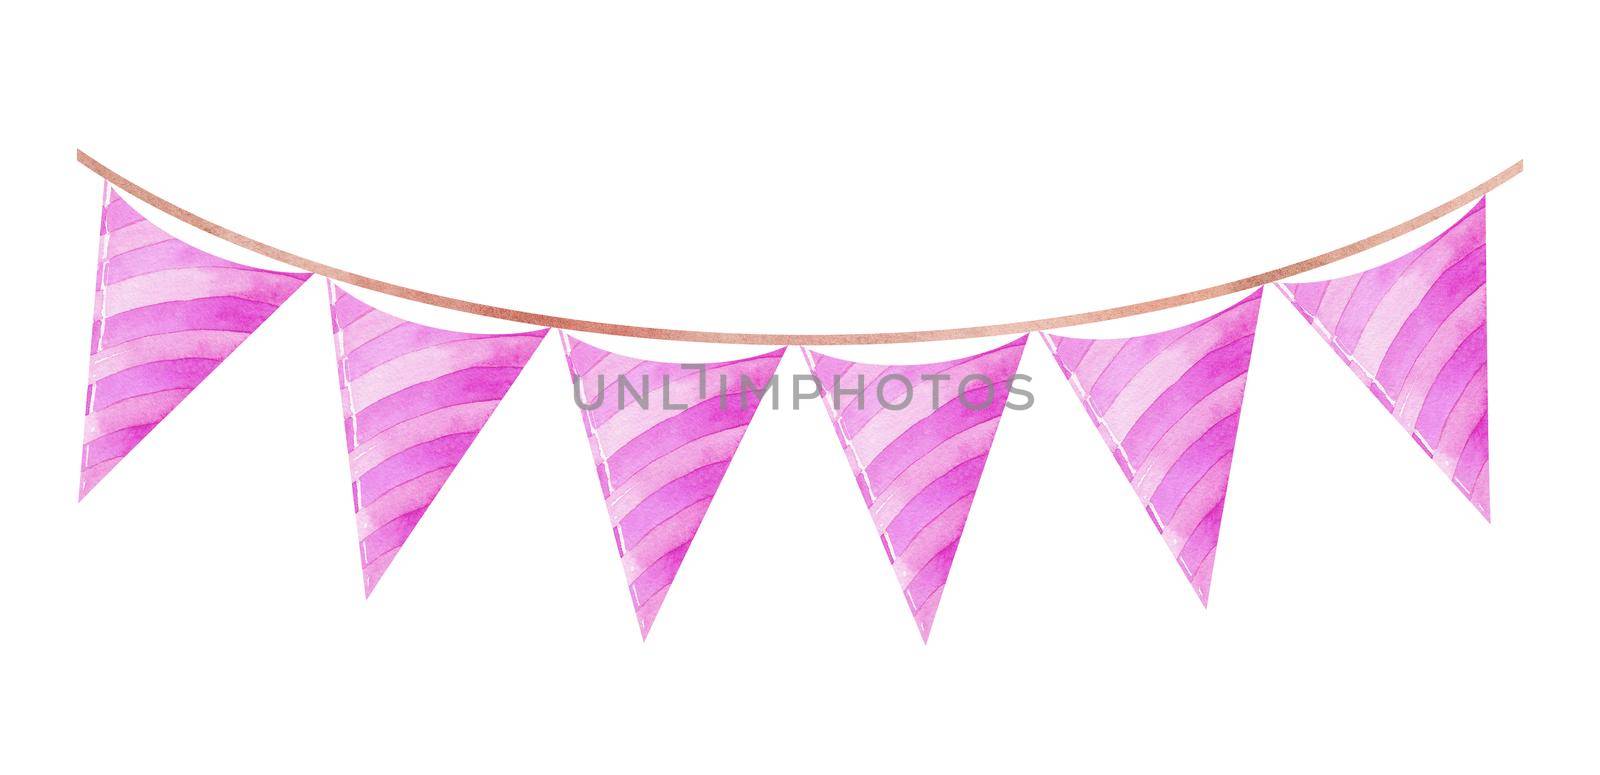 Watercolor pink bunting flags isolated on white background. Birthday party garland, greeting card decor